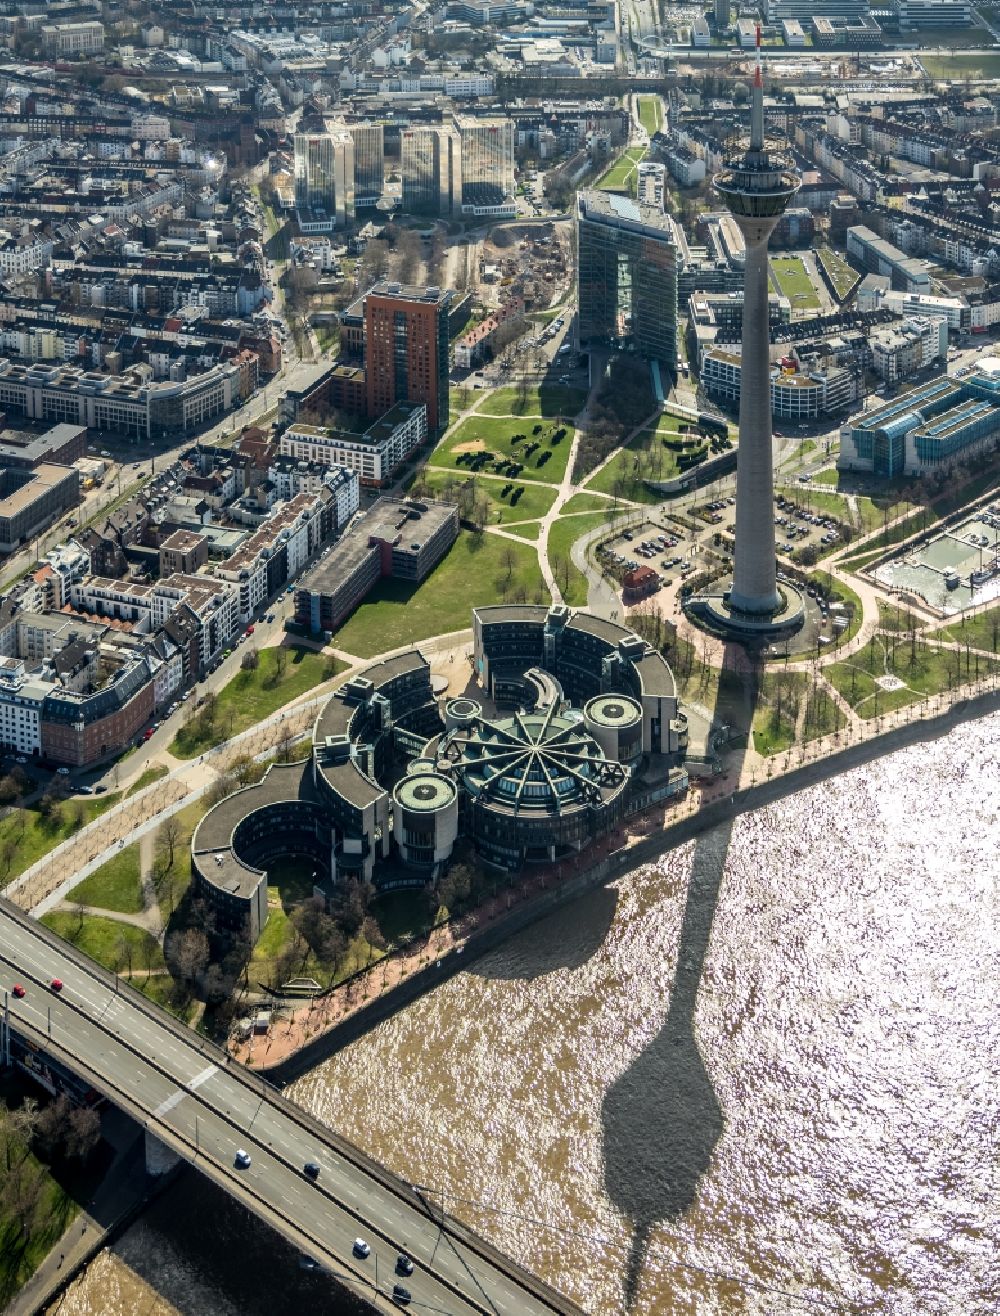 Aerial photograph Düsseldorf - Building of parliament from Dusseldorf to the seat of the state government and the country's parliament on the banks of the river Rhine in Dusseldorf in North Rhine-Westphalia NRW